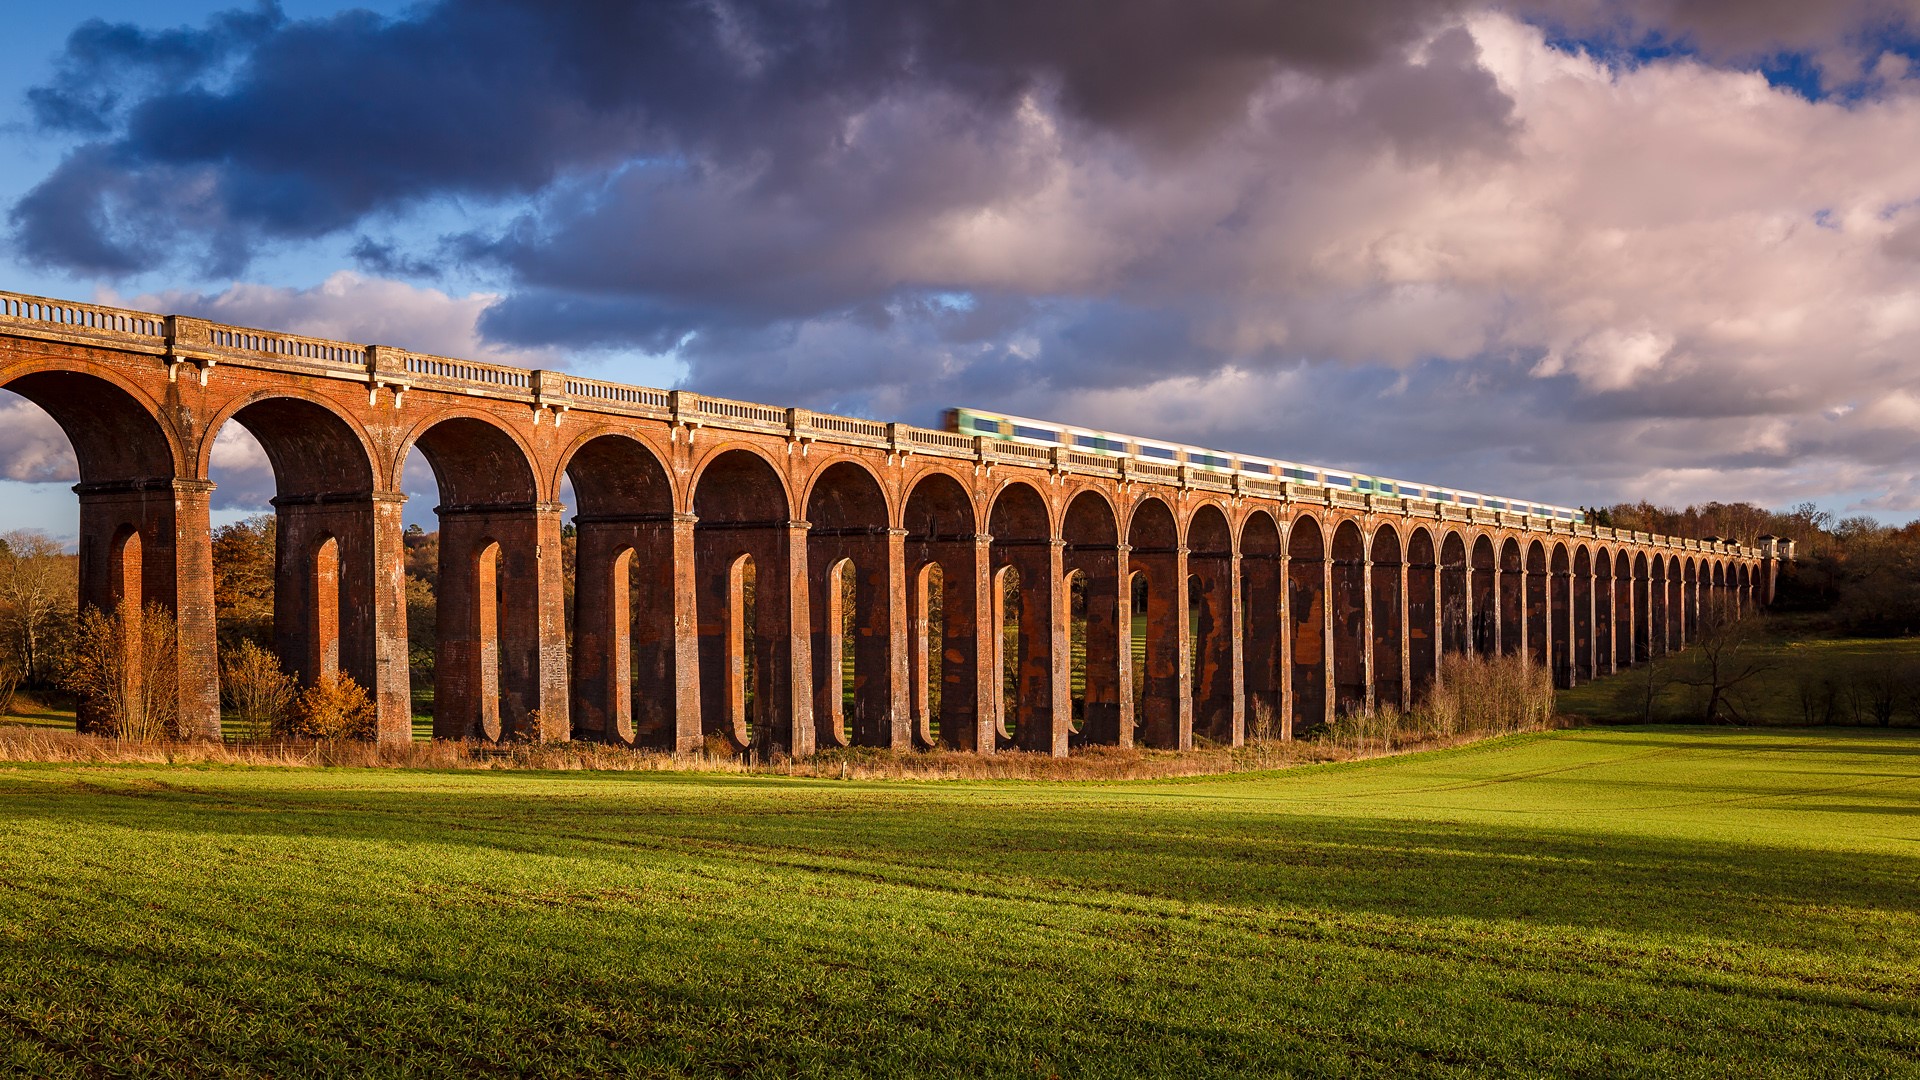 Nature Landscape Bridge Grass Field Clouds Trees Ouse Valley Viaduct Sussex England UK 1920x1080